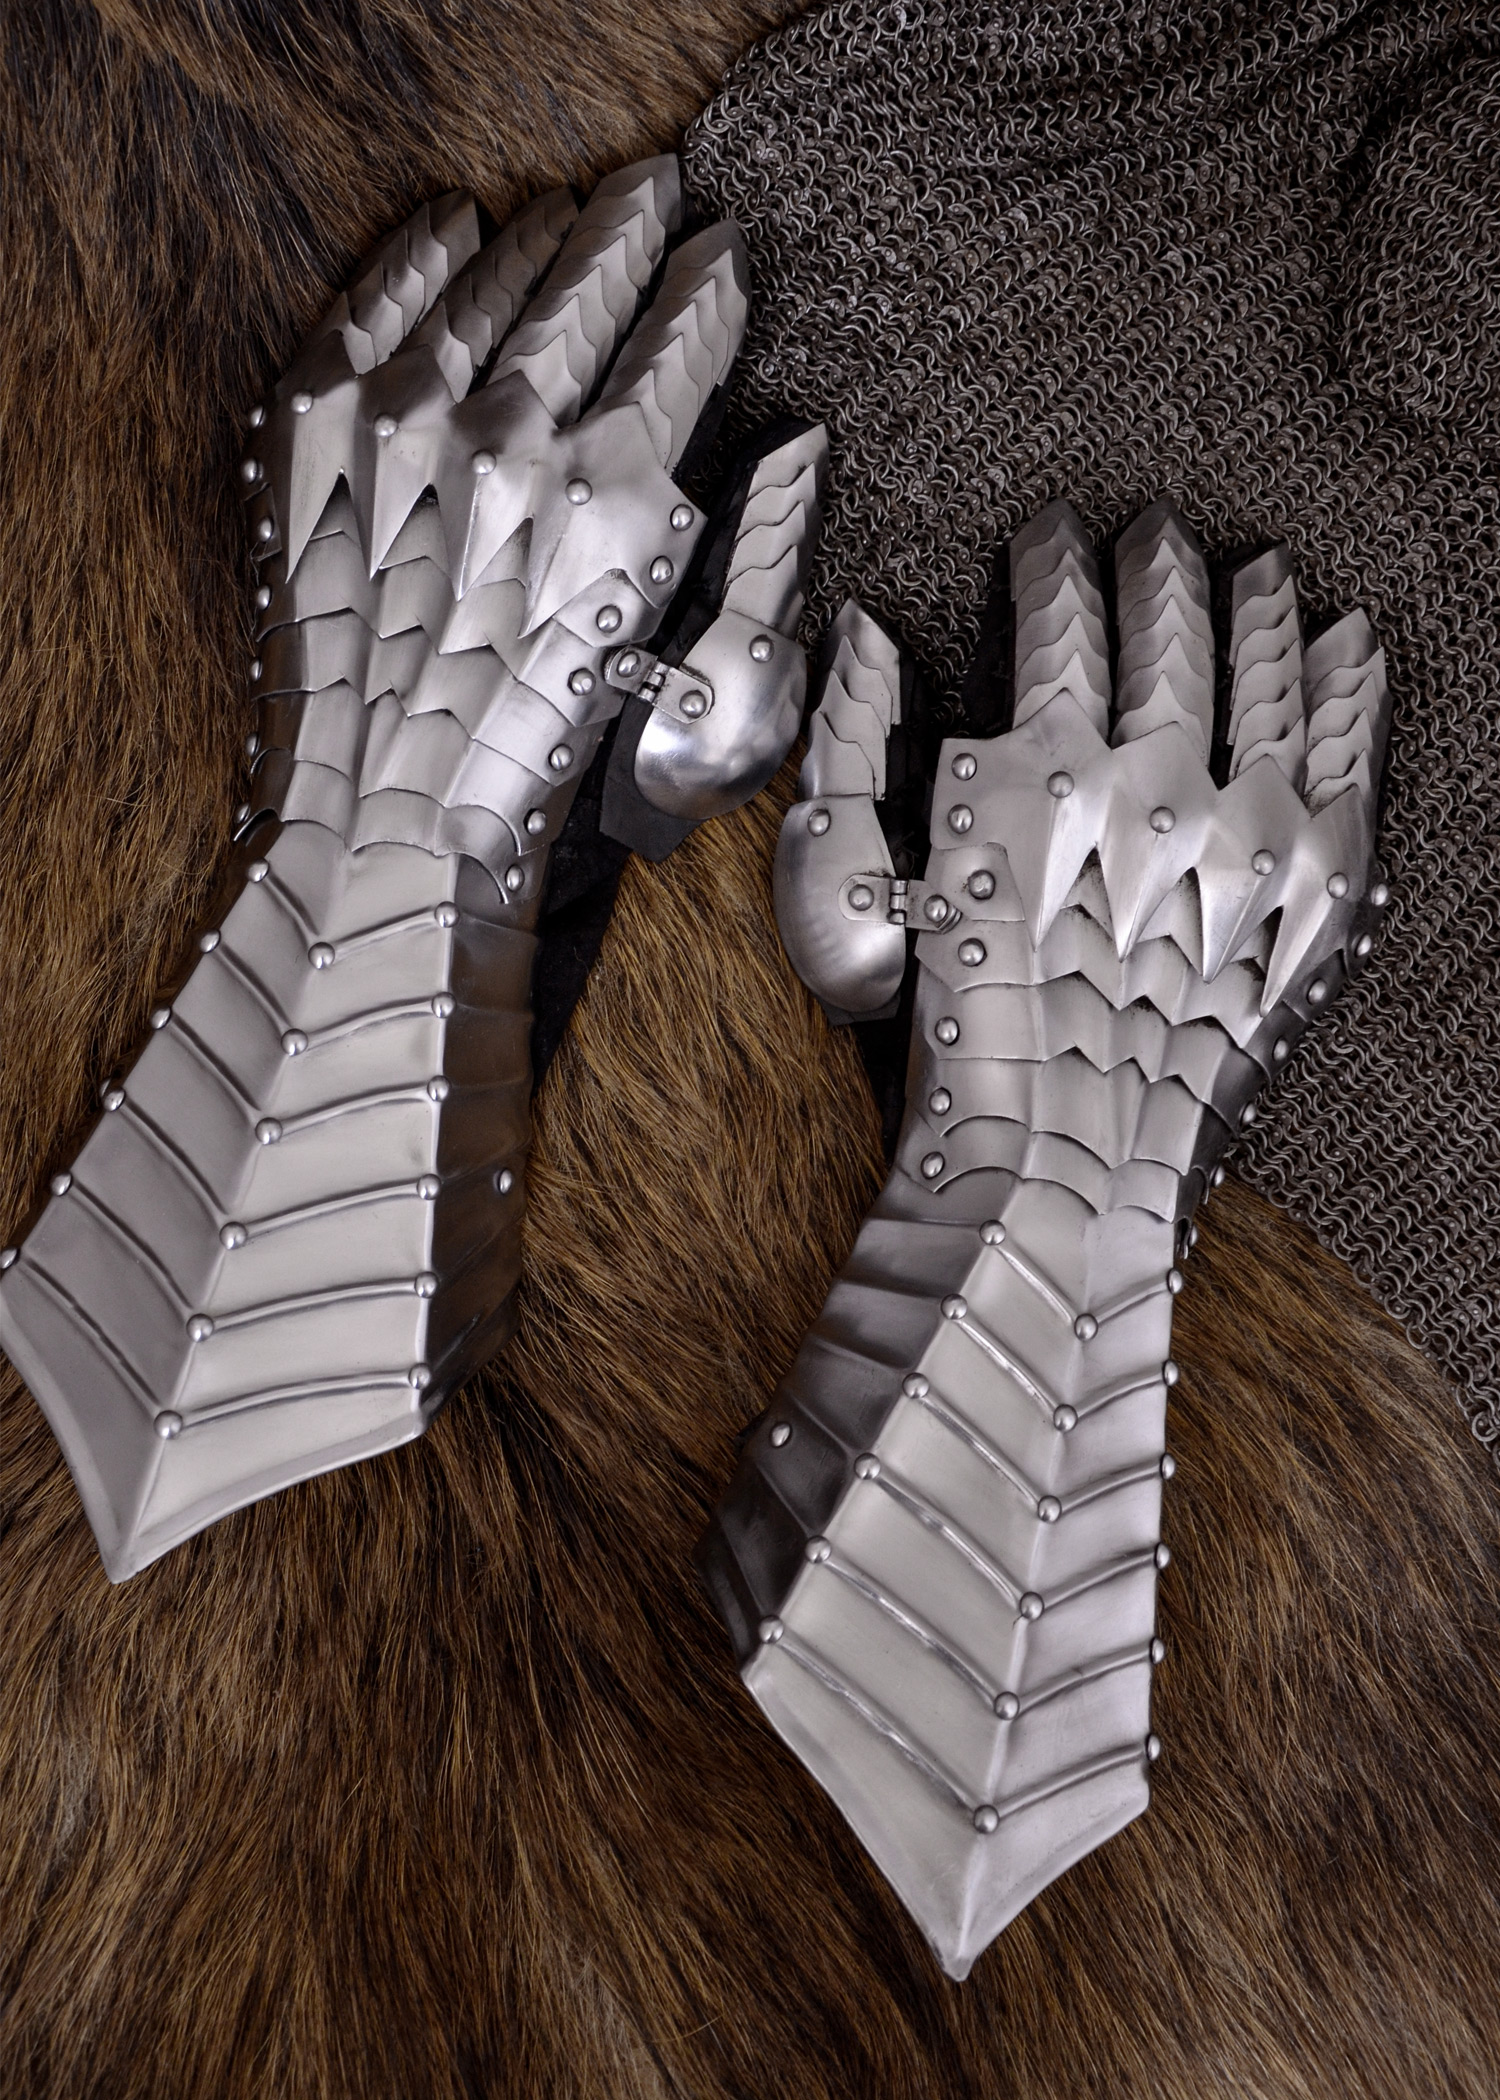 Medieval Steel Articulated Gauntlets With Gloves Re-Enactment Or LARP 